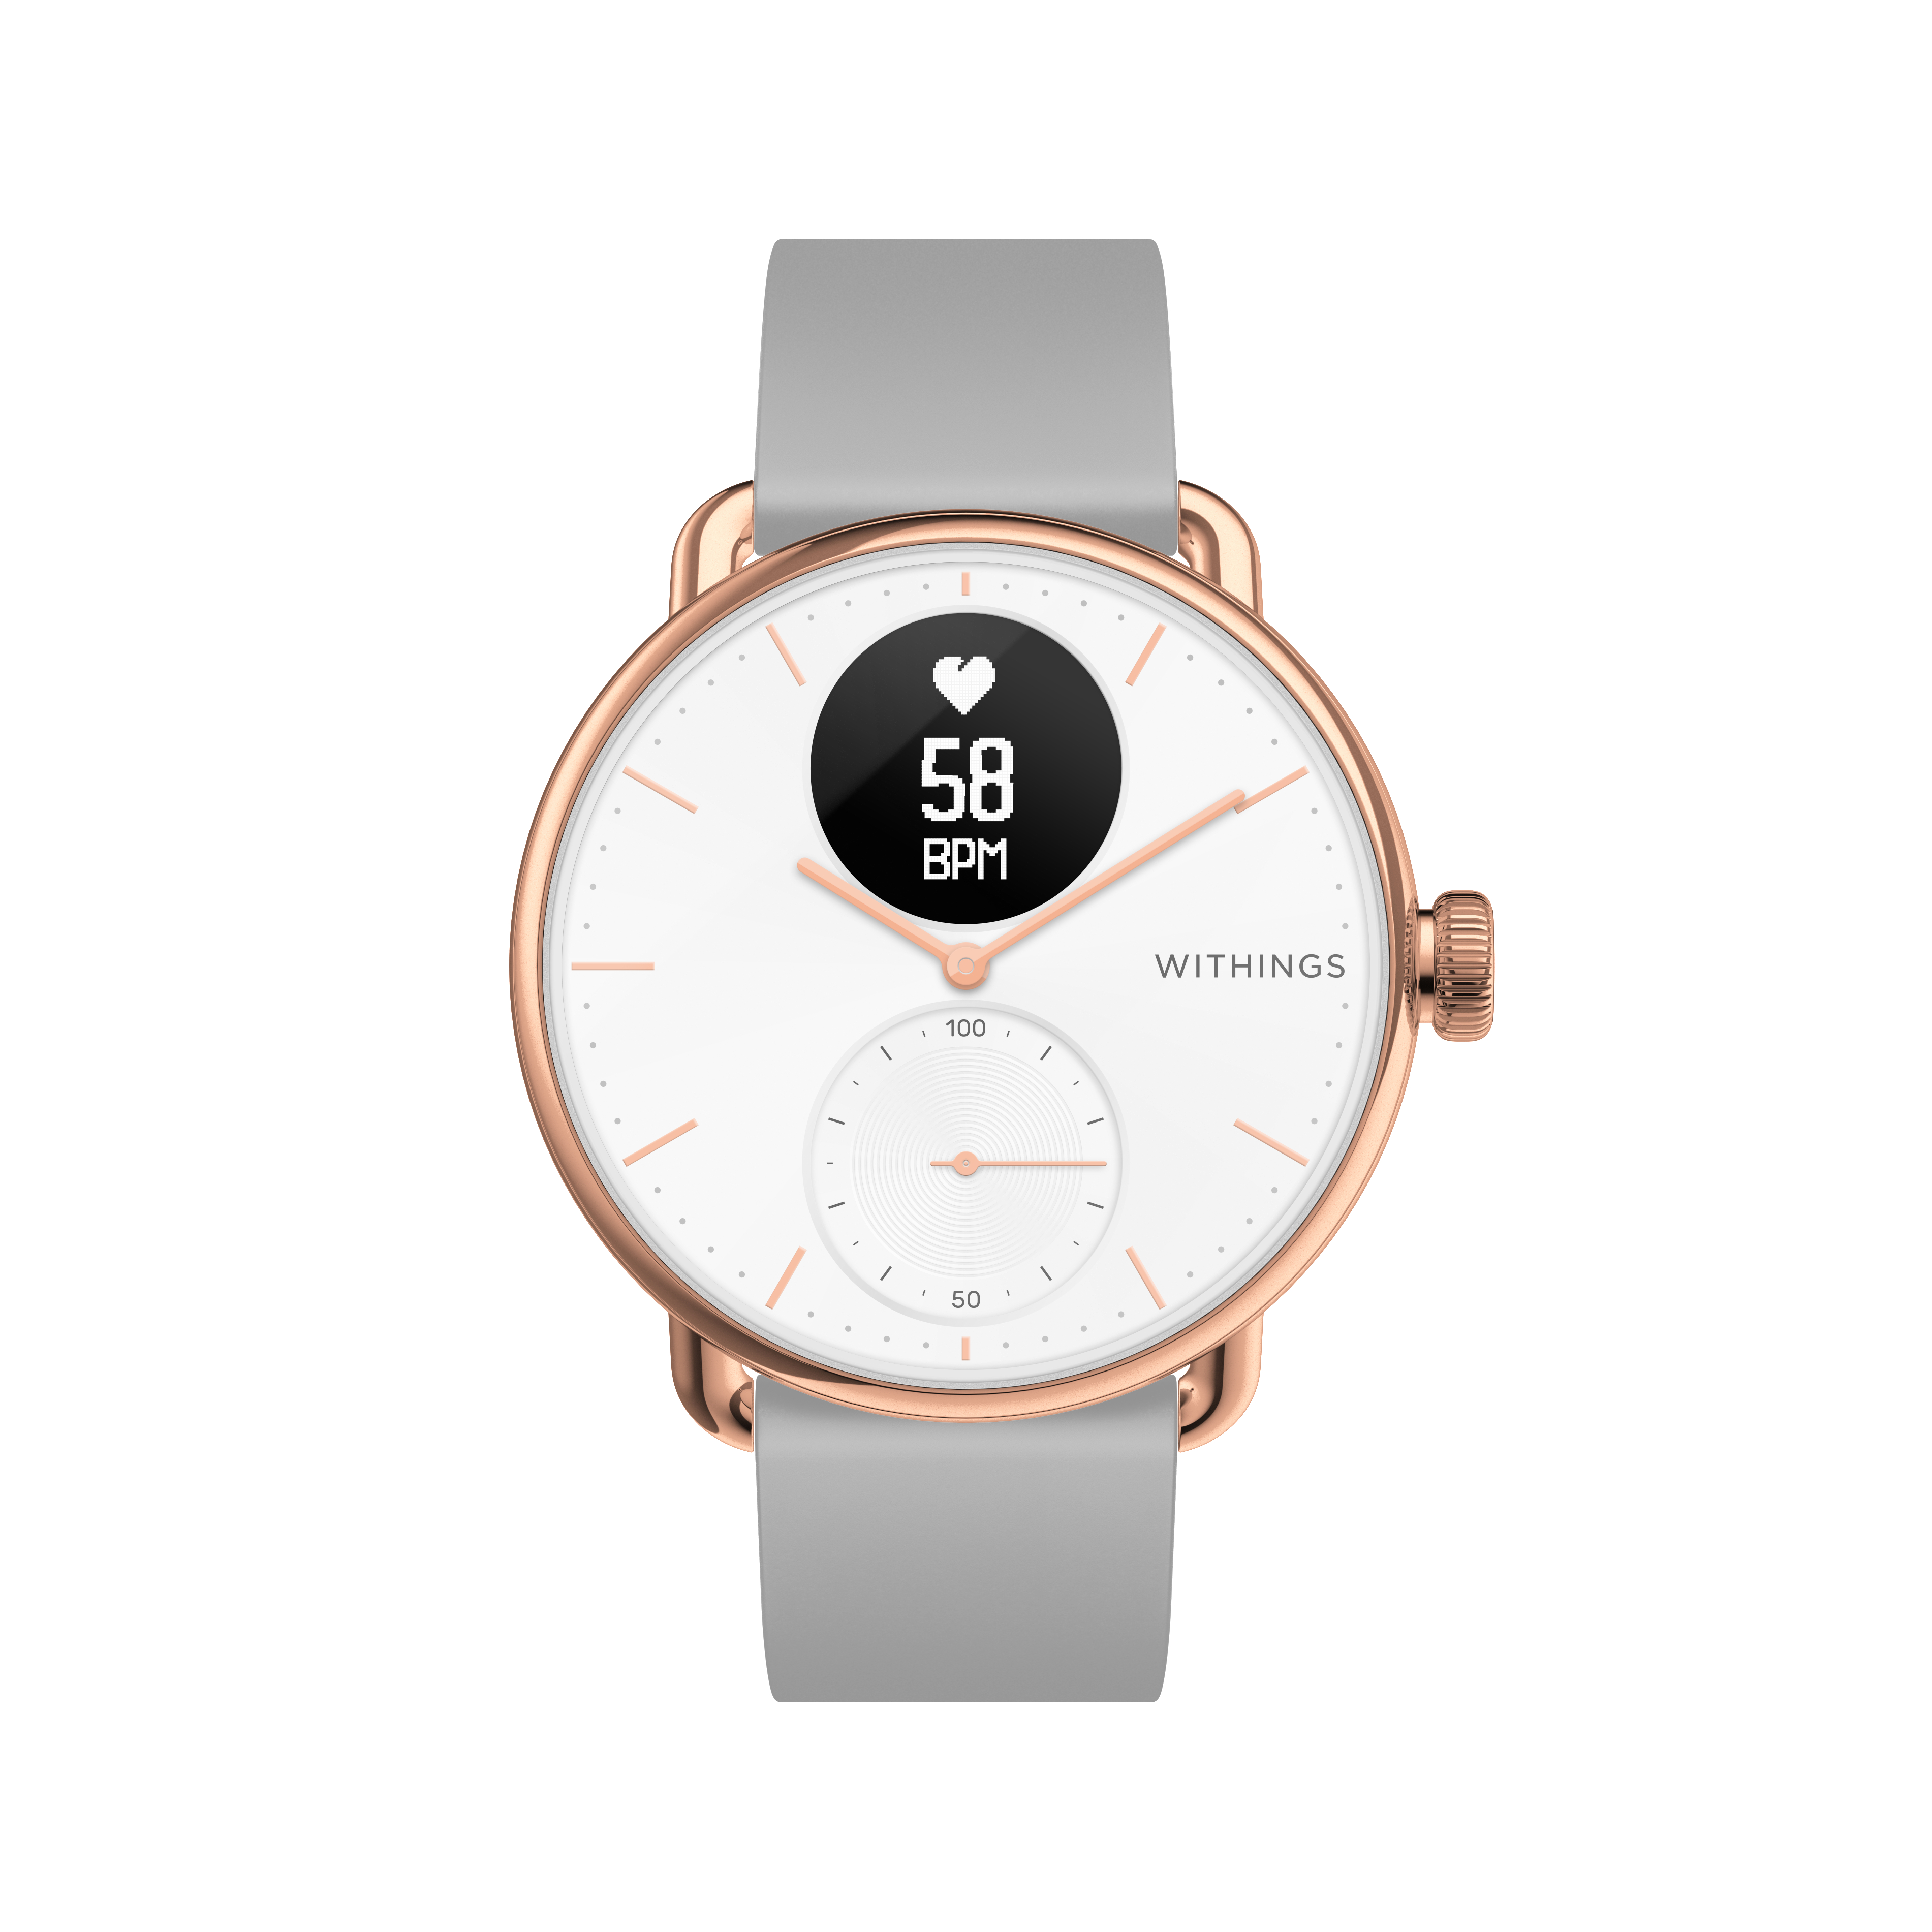 Elastomer, Edelstahl ScanWatch gold rose Smartwatch WITHINGS mm, 210